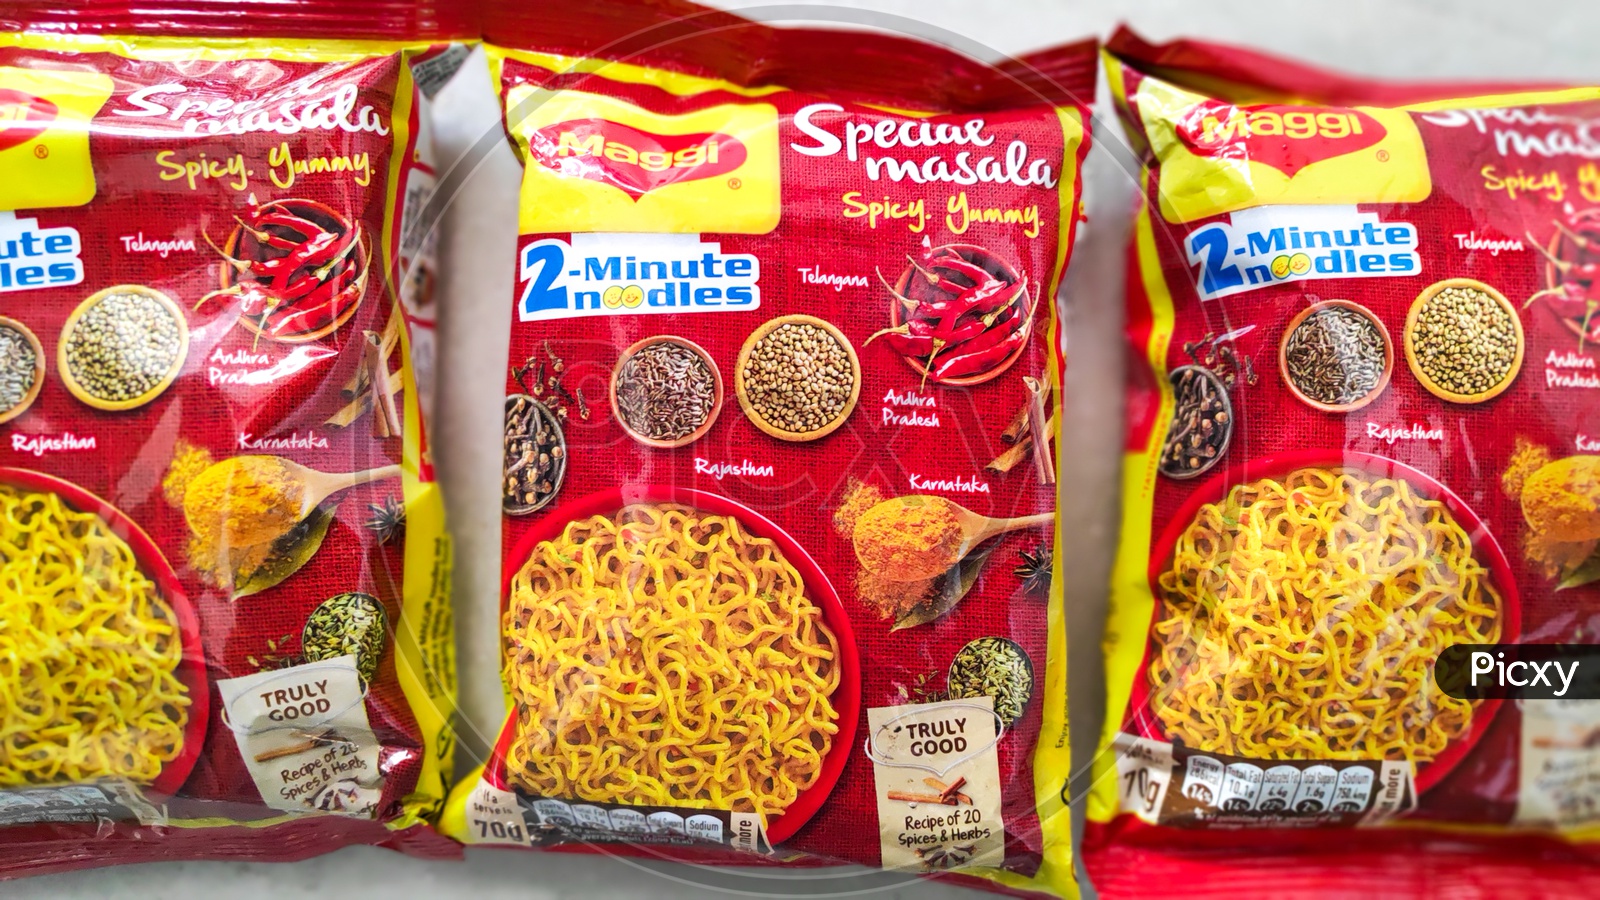 Nestle Maggi 2 minute instant noodles packets